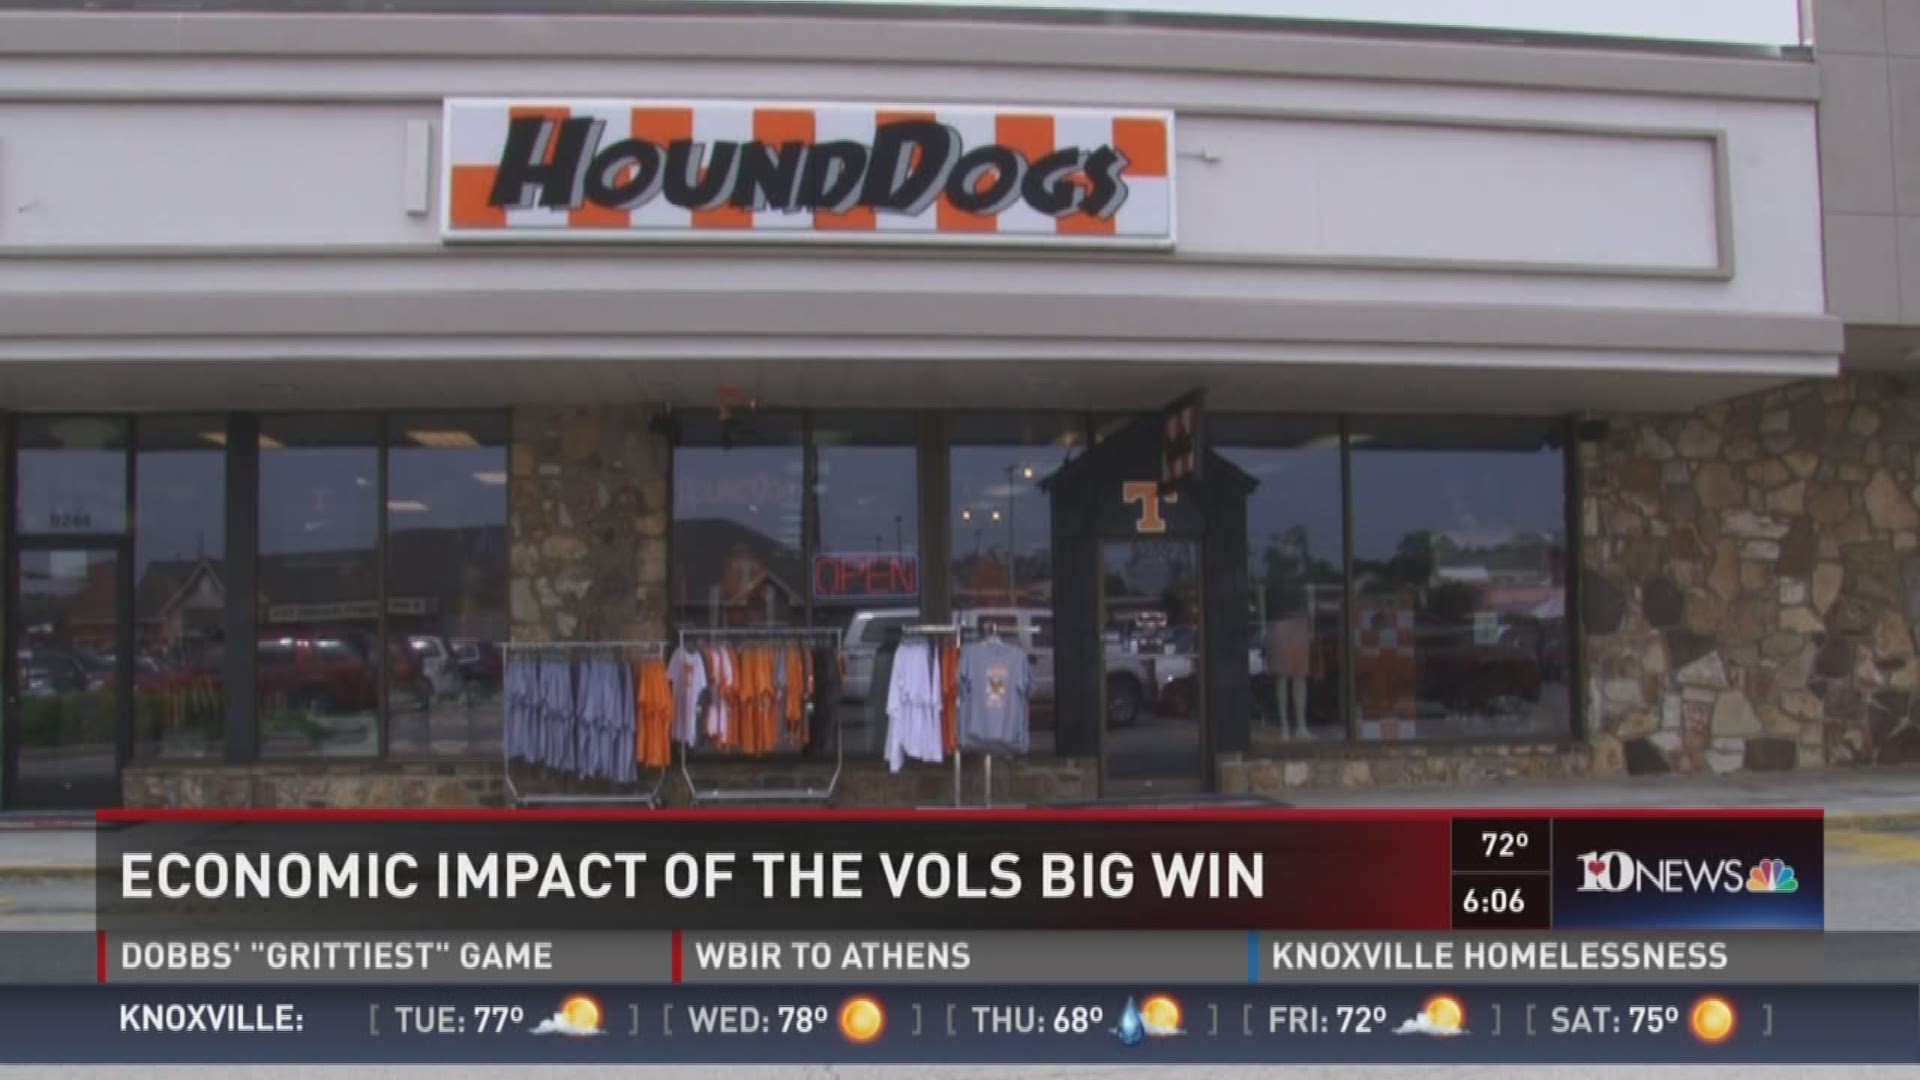 For the past 11 years, the Florida game hasn't been so good for business. How could the Vols win against the Gators affect Knoxville's economy?